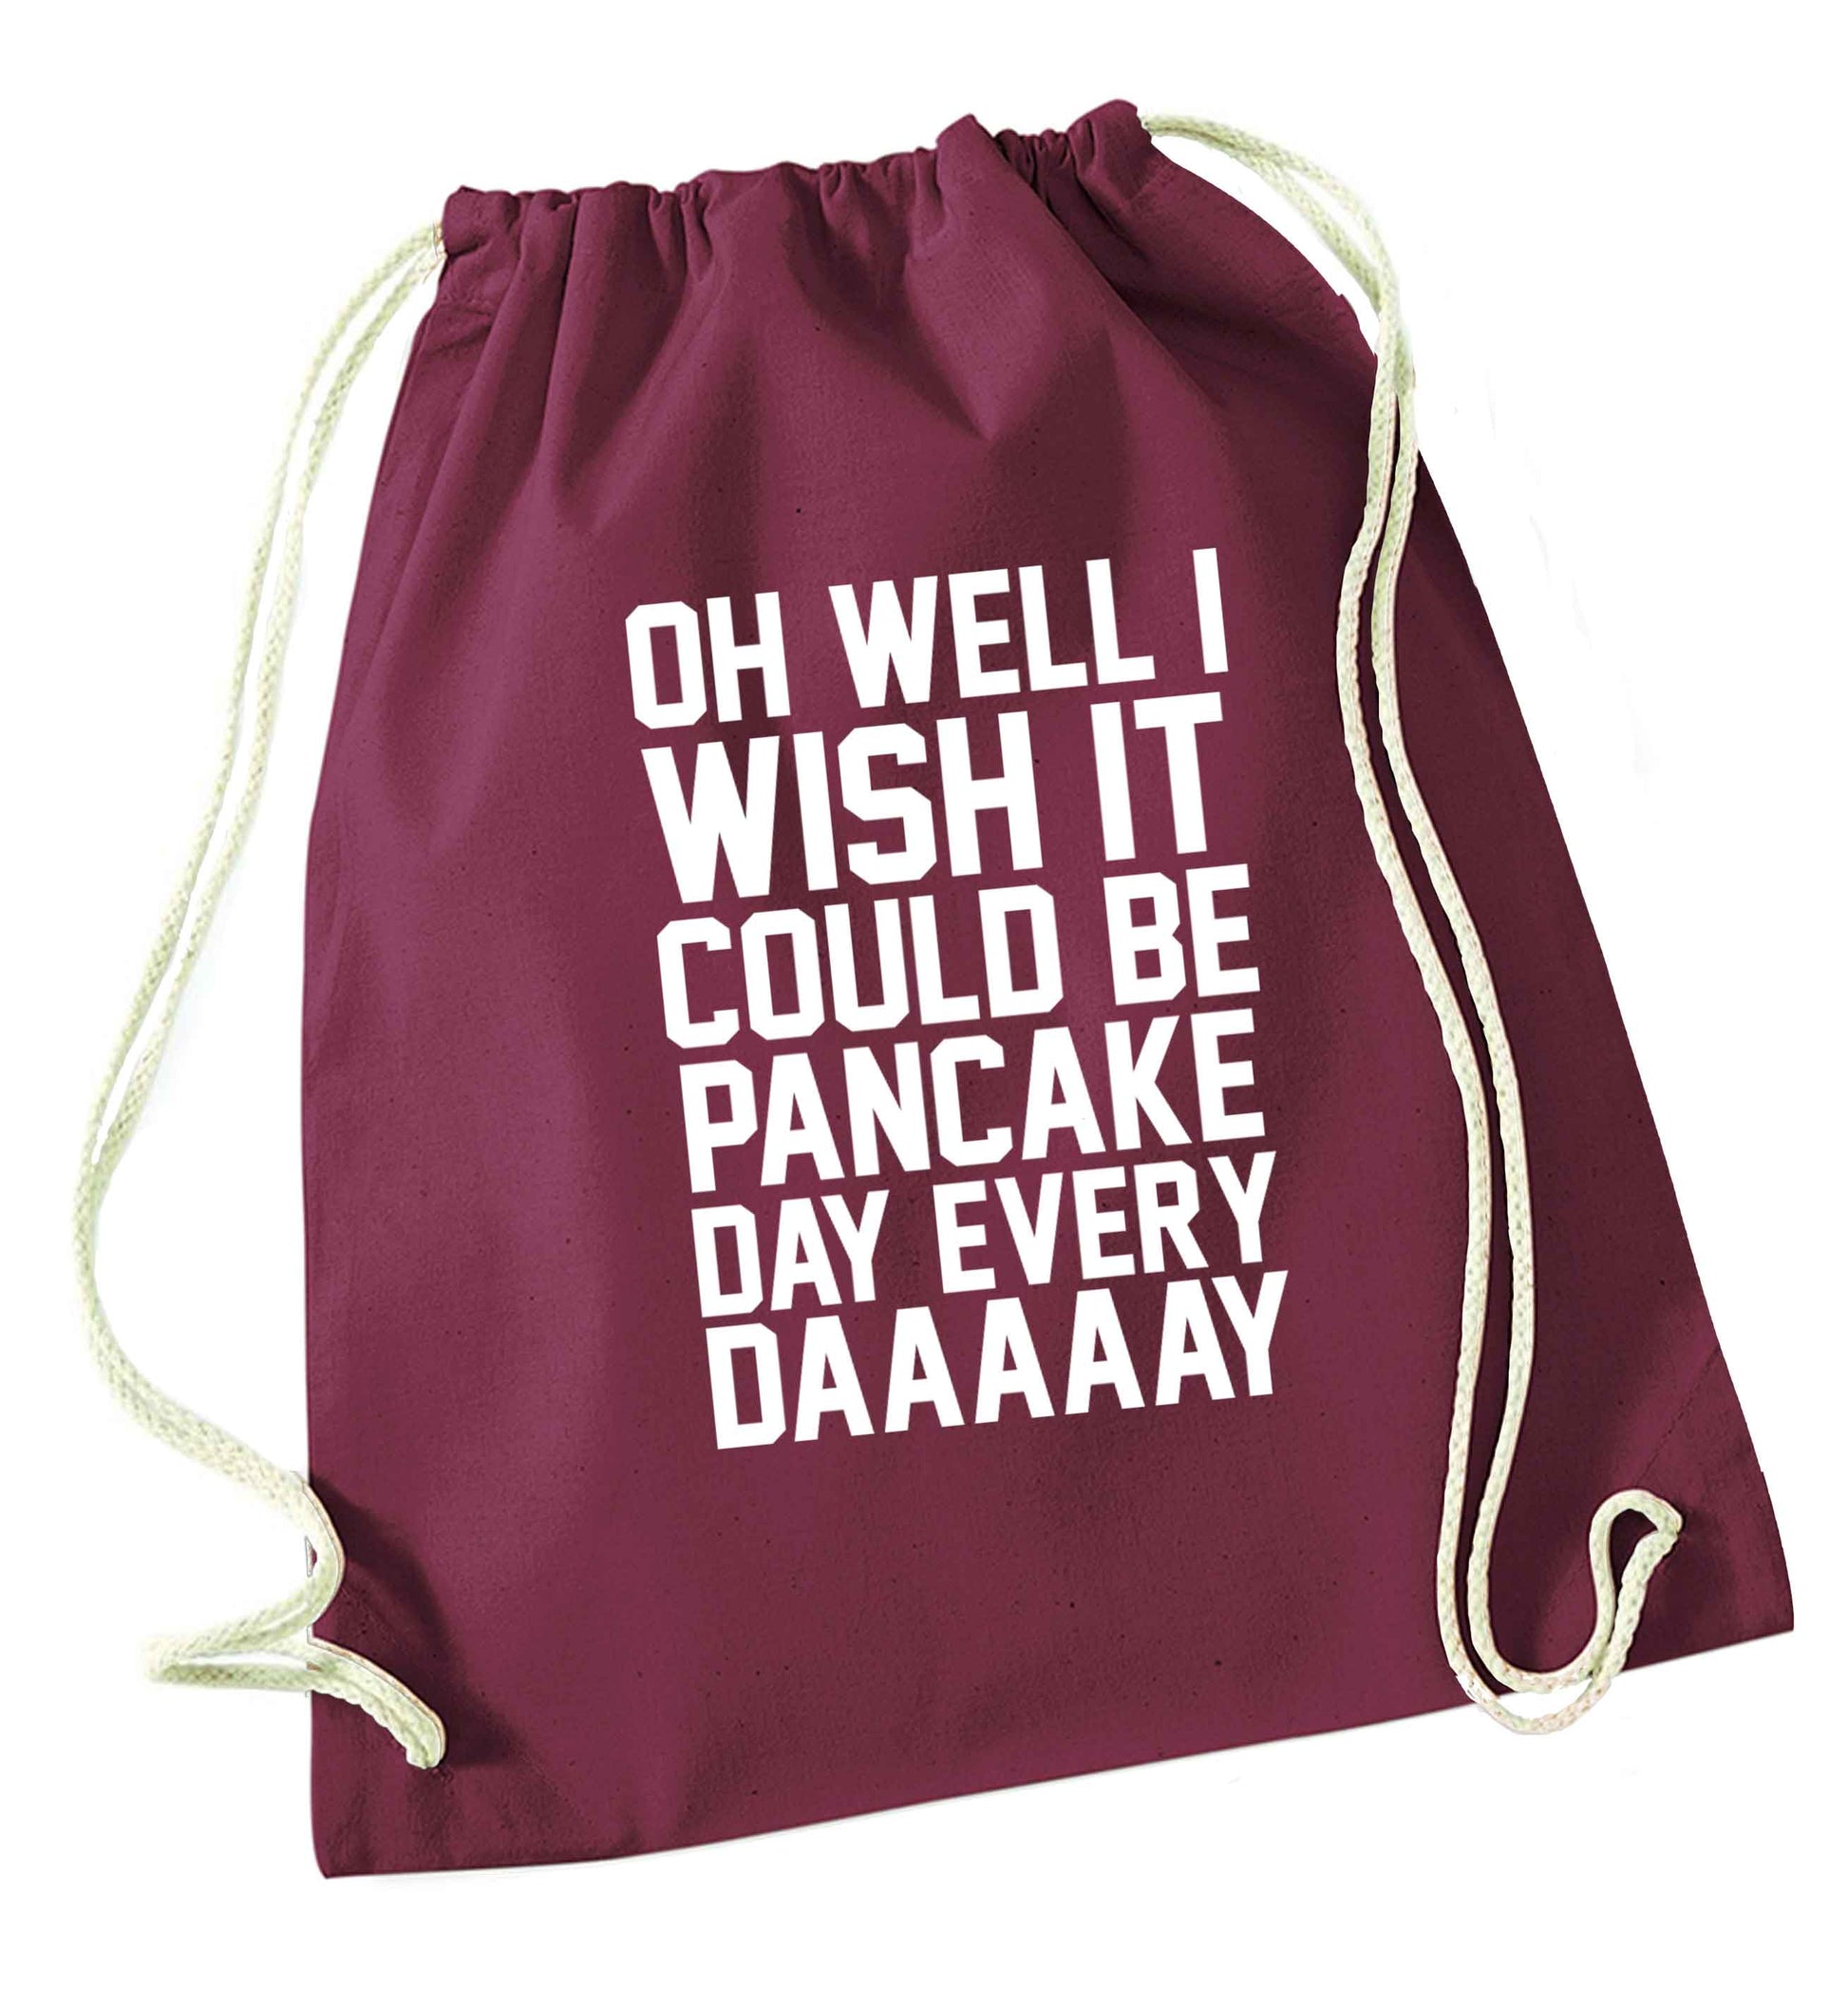 Oh well I wish it could be pancake day every day maroon drawstring bag